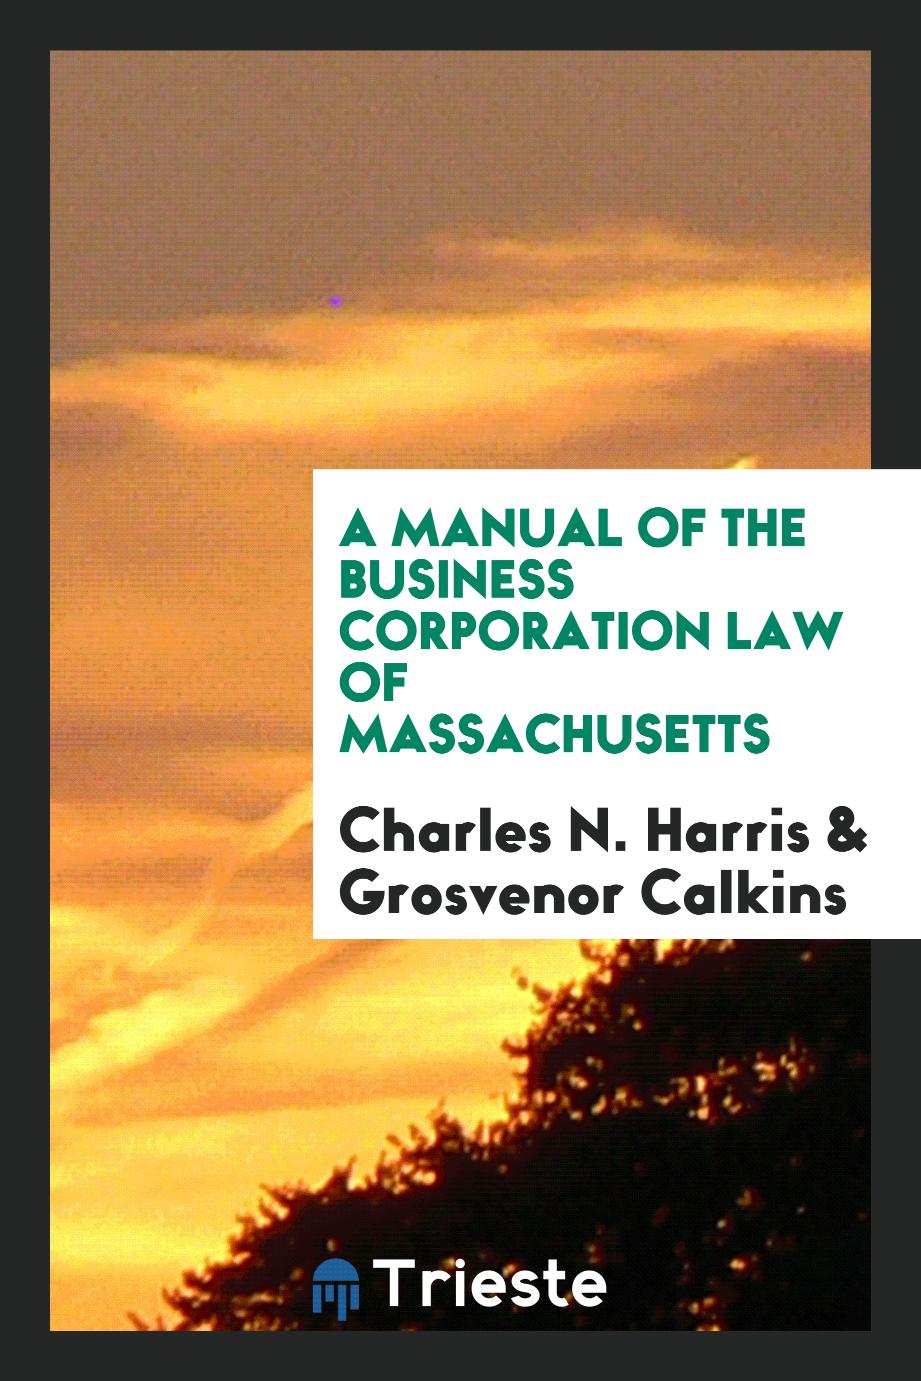 A Manual of the Business Corporation Law of Massachusetts